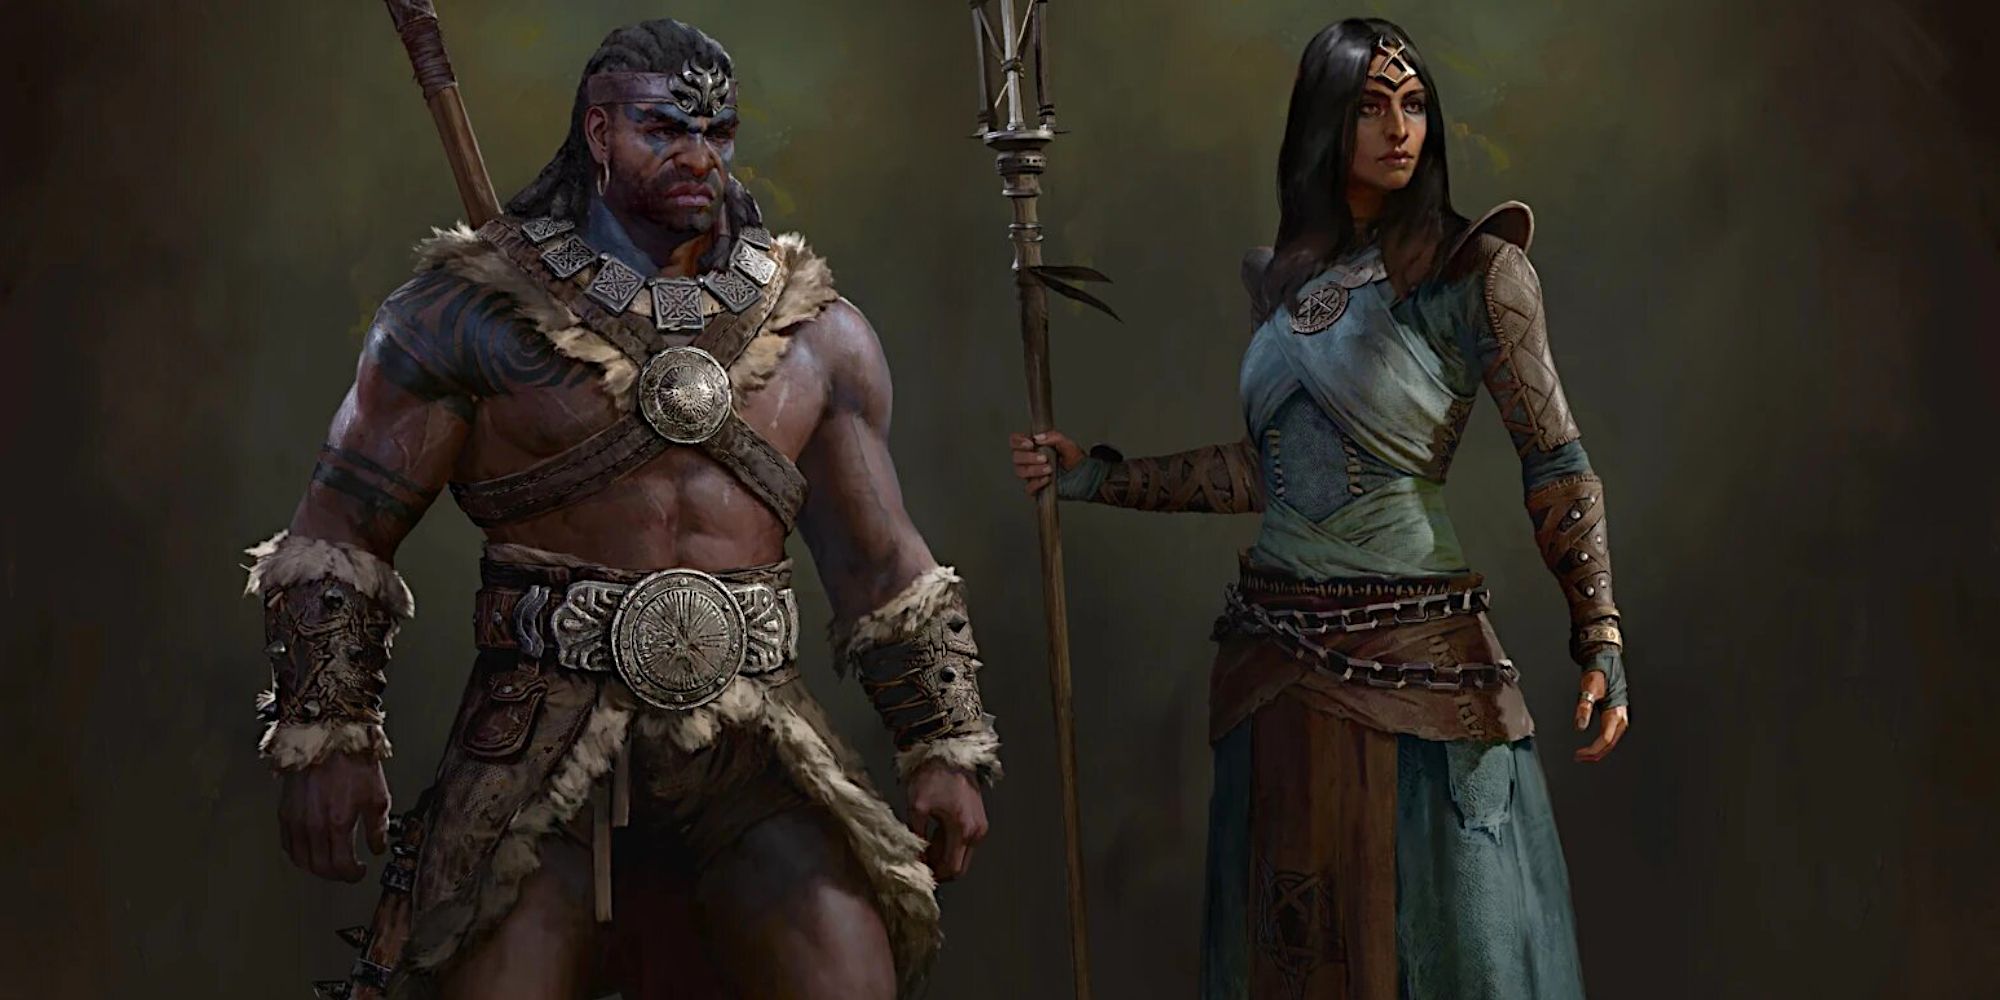 Split image of the characters Barbarian and Sorceress in Diablo 4.